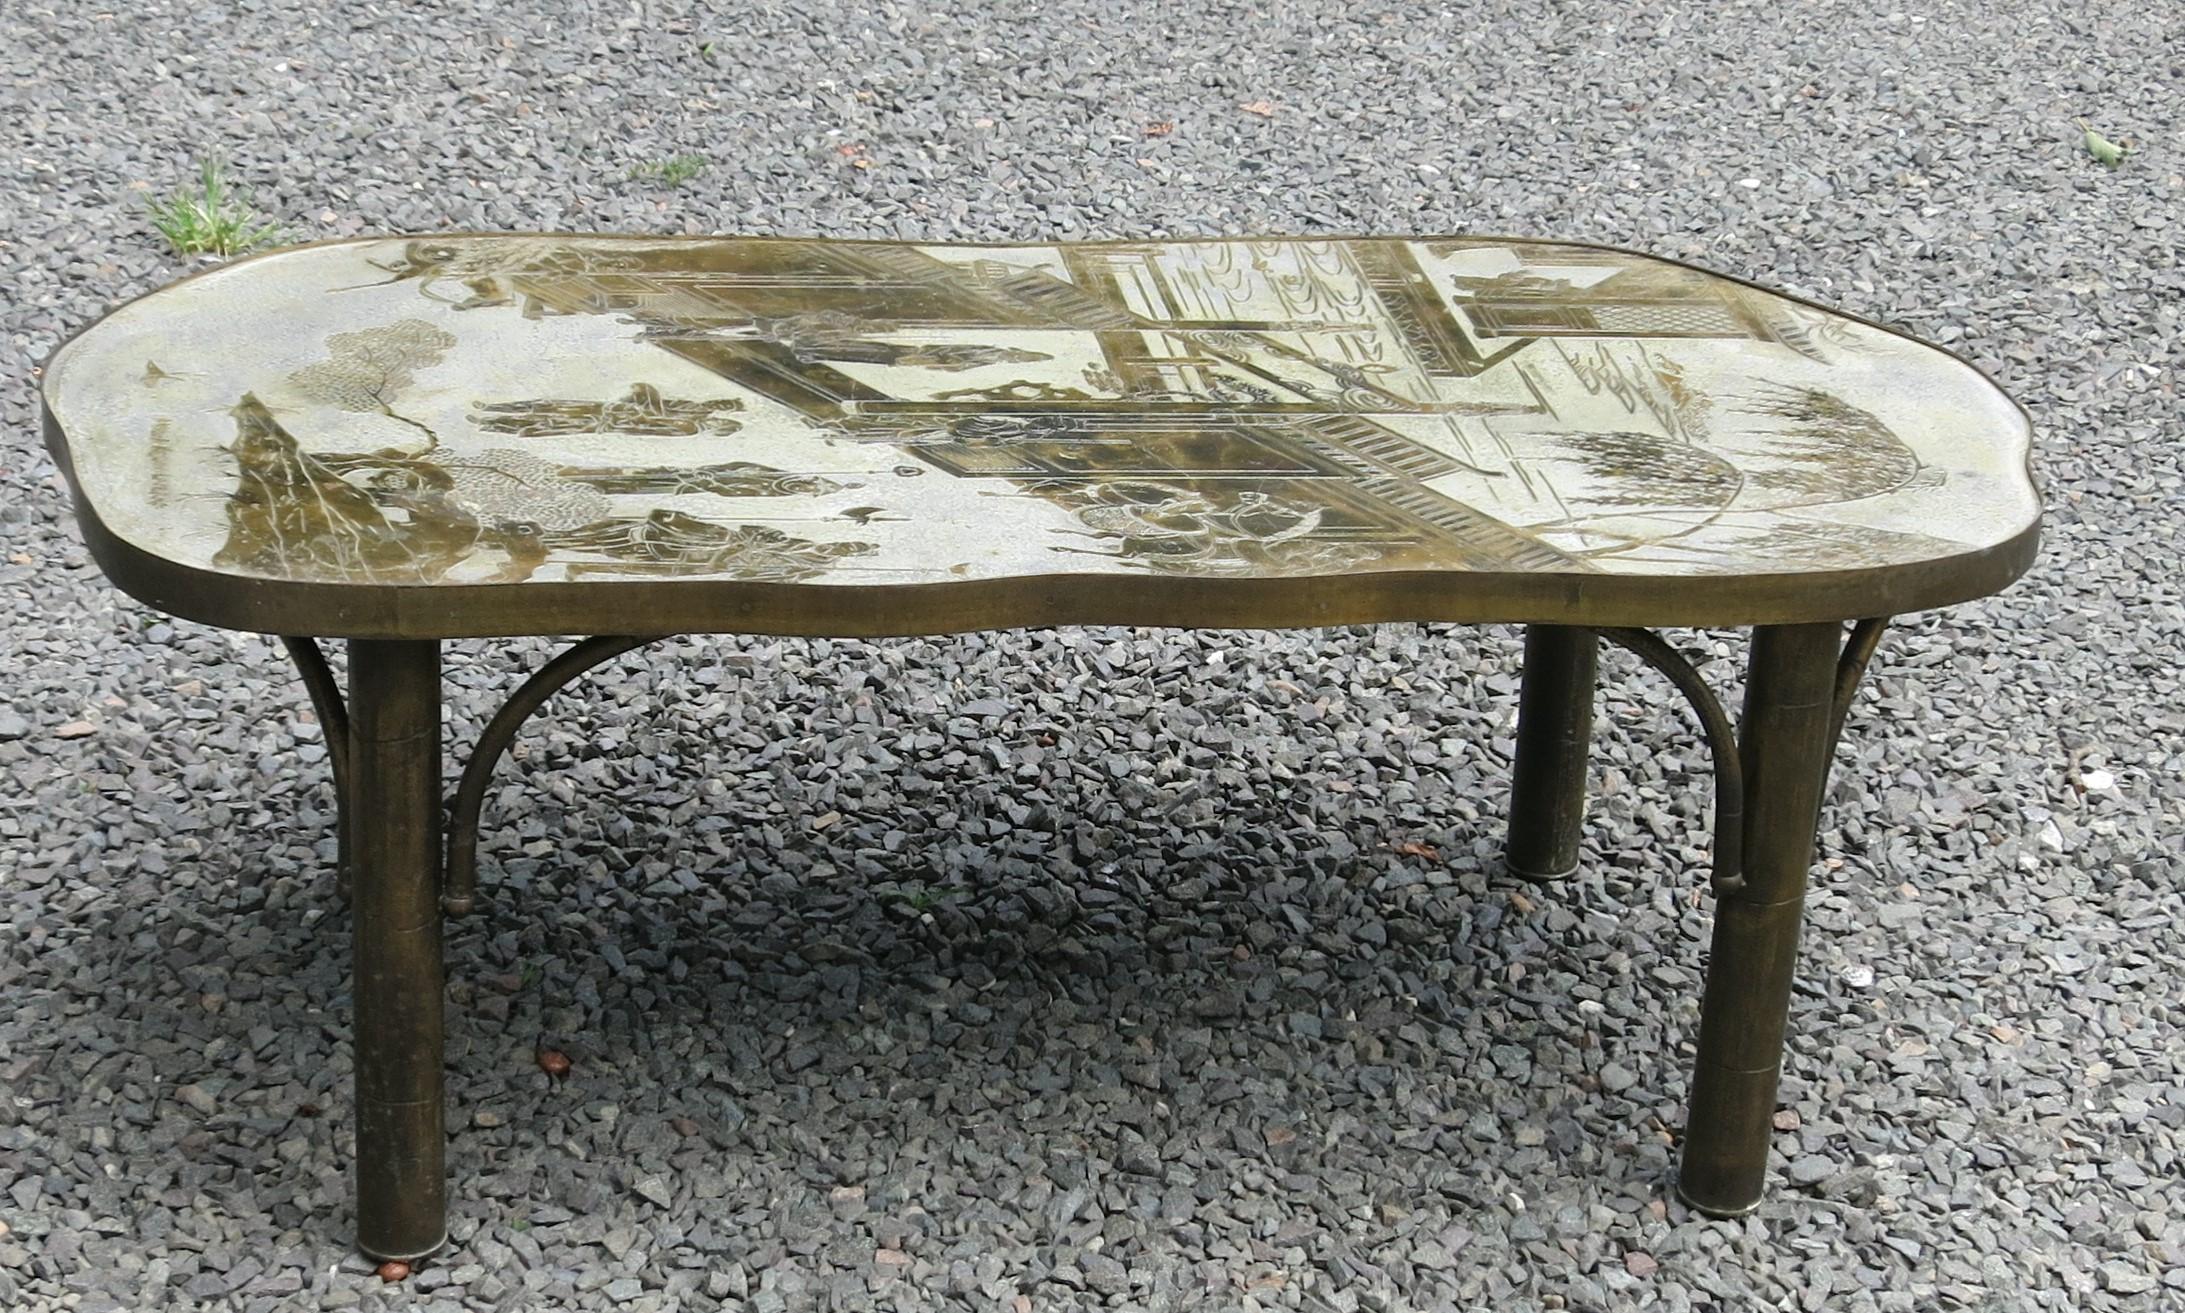 Philip and Kelvin LaVerne bronze chinoiserie chan coffee table #140. Good condition with normal wear and oxidation. A few rubs and scratches to the top. It is 23.5